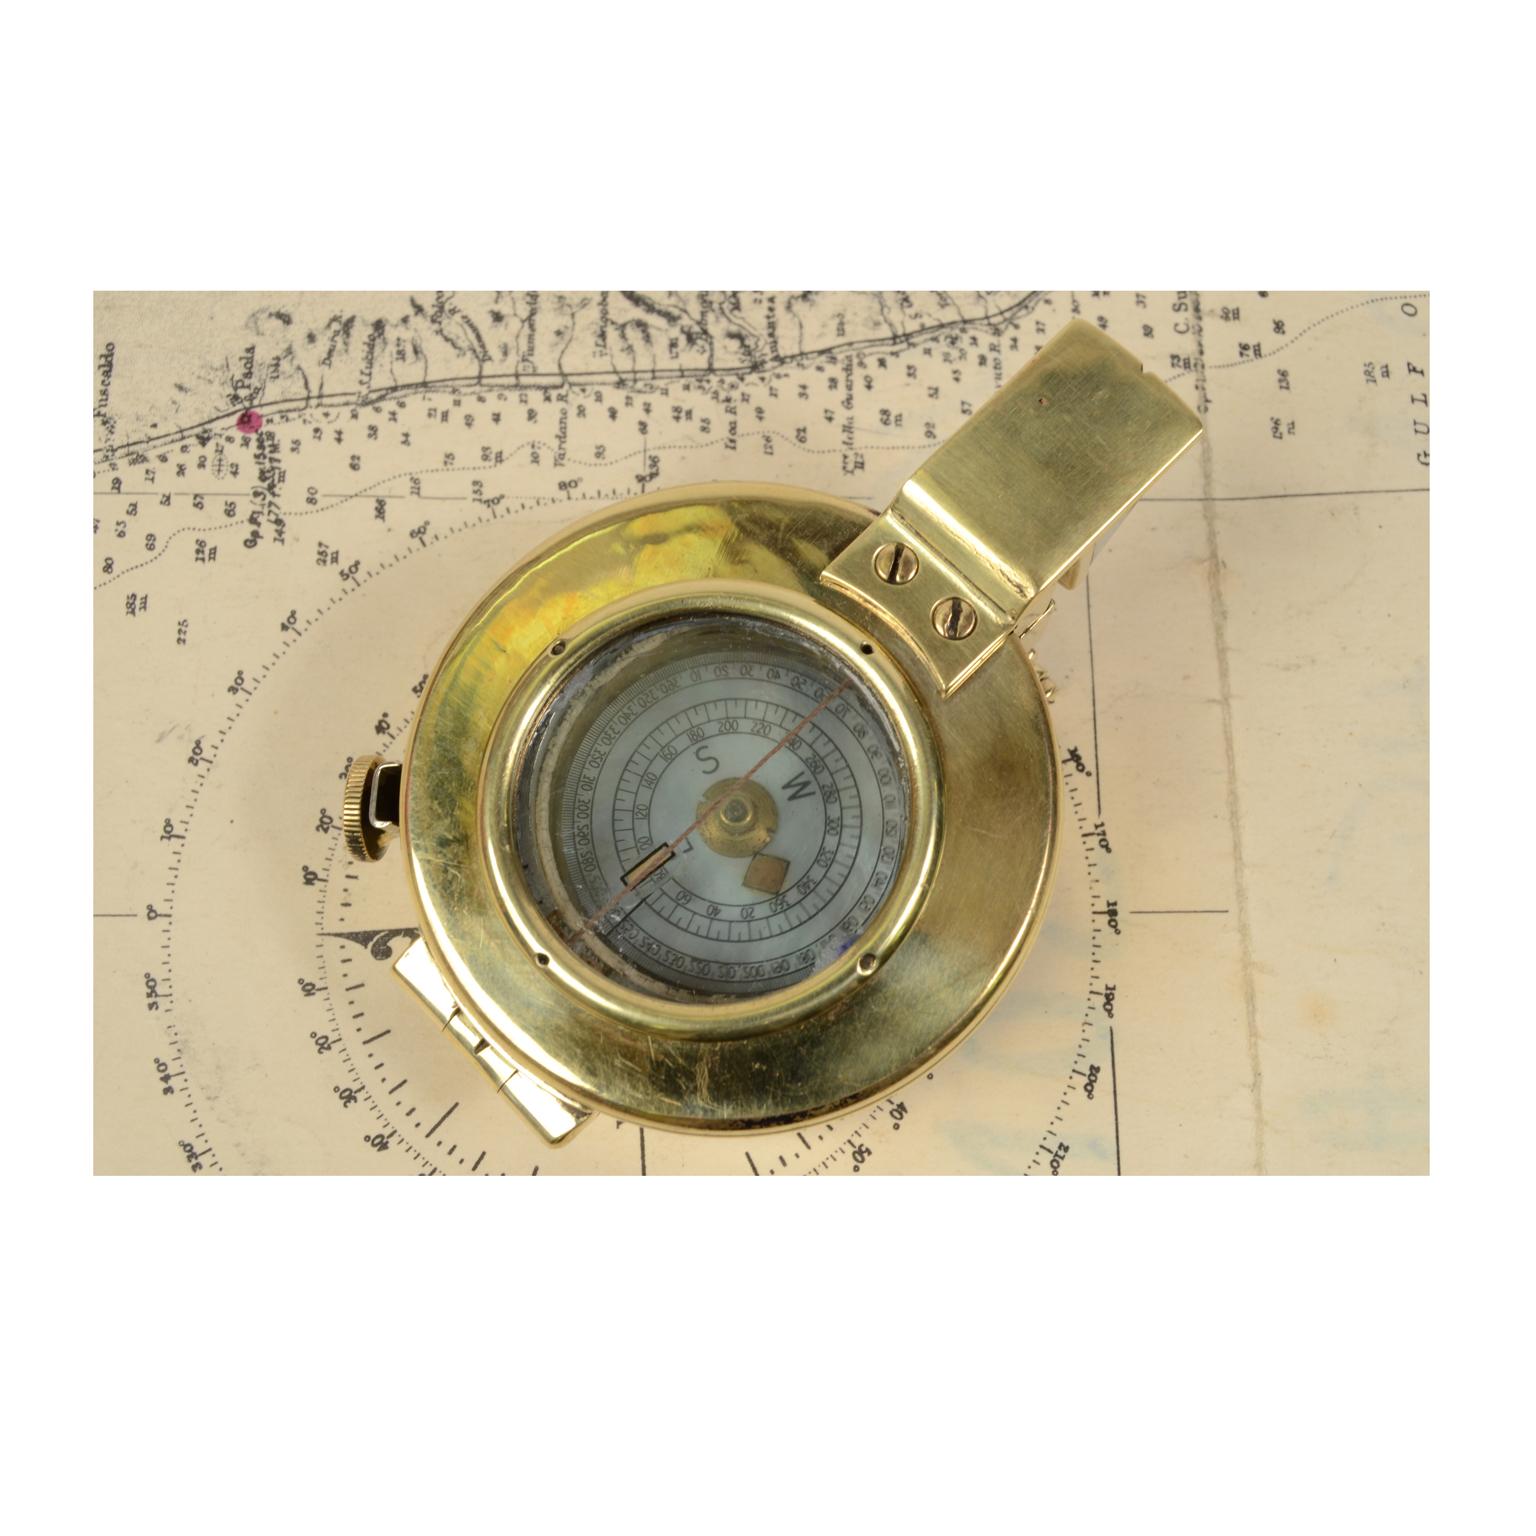 Prismatic Brass Compass UK 1940 for British Army Officers WWII 3